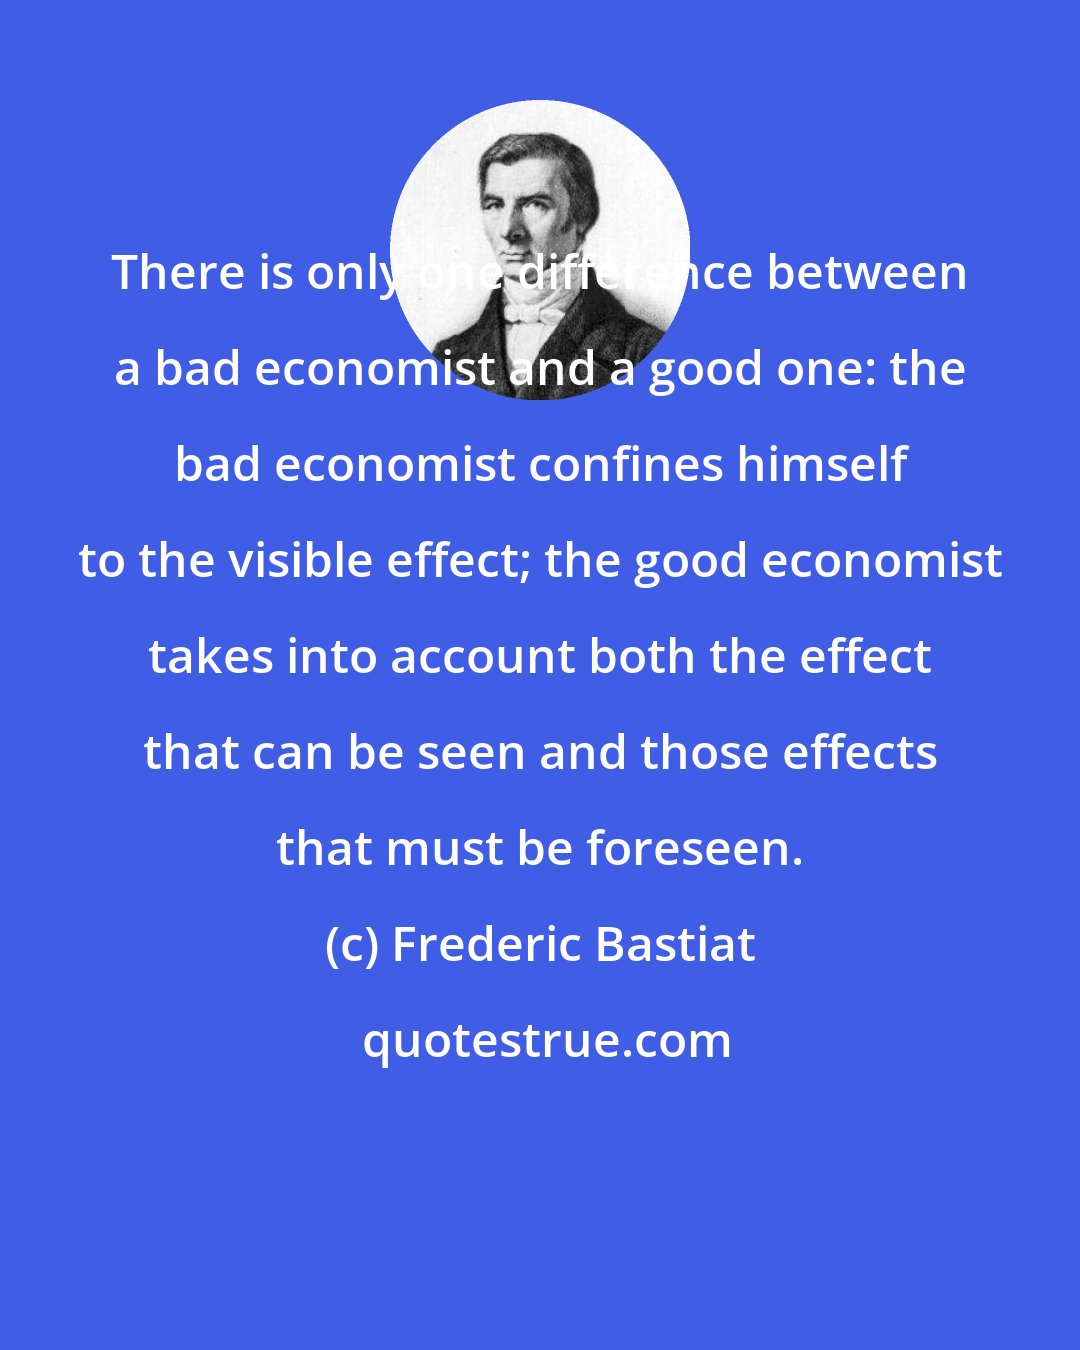 Frederic Bastiat: There is only one difference between a bad economist and a good one: the bad economist confines himself to the visible effect; the good economist takes into account both the effect that can be seen and those effects that must be foreseen.